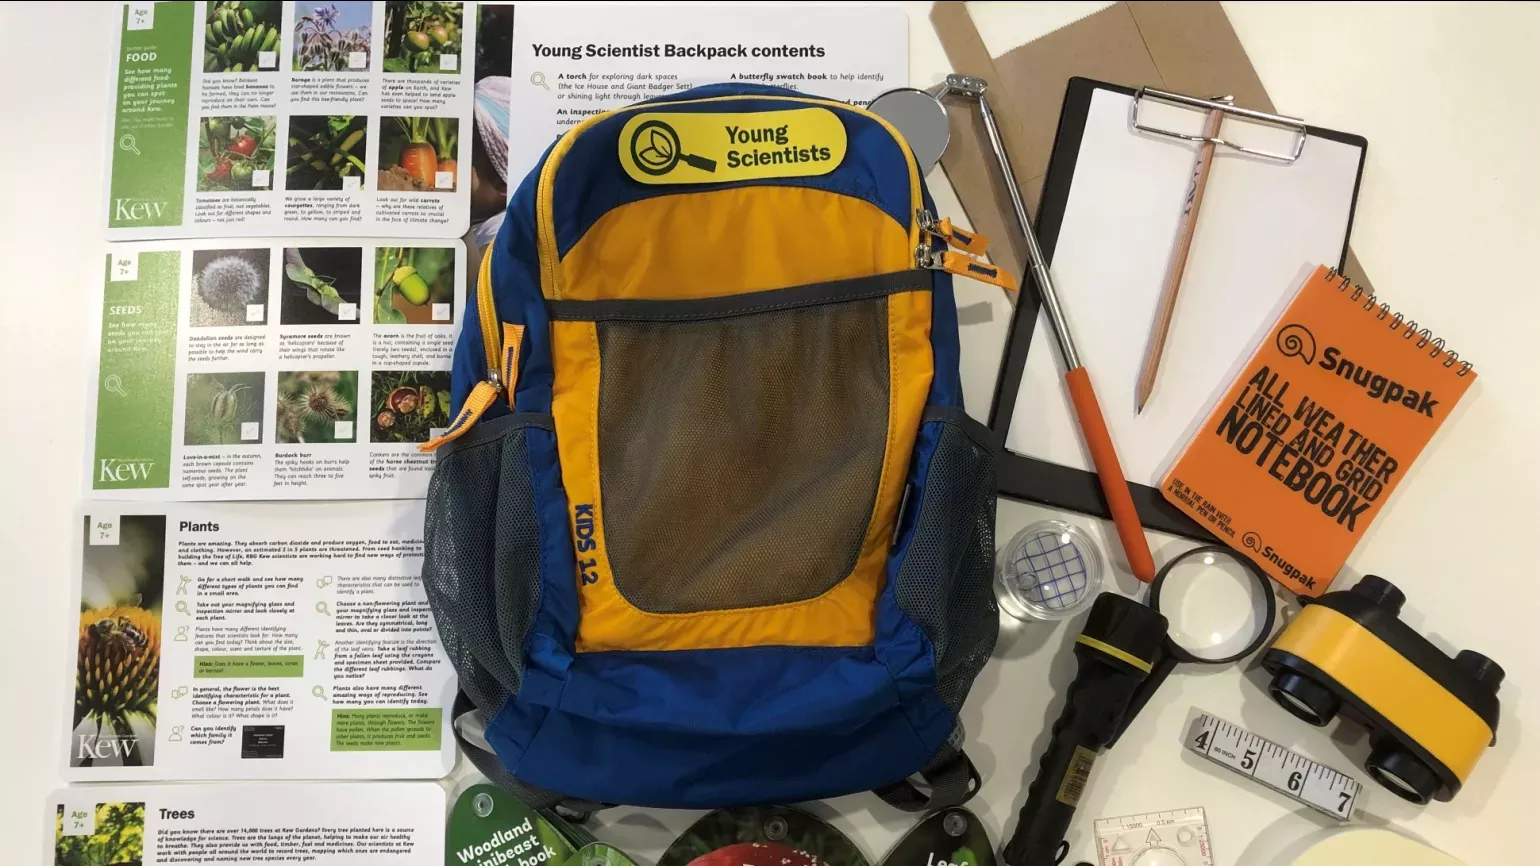 A backpack with scientific contents